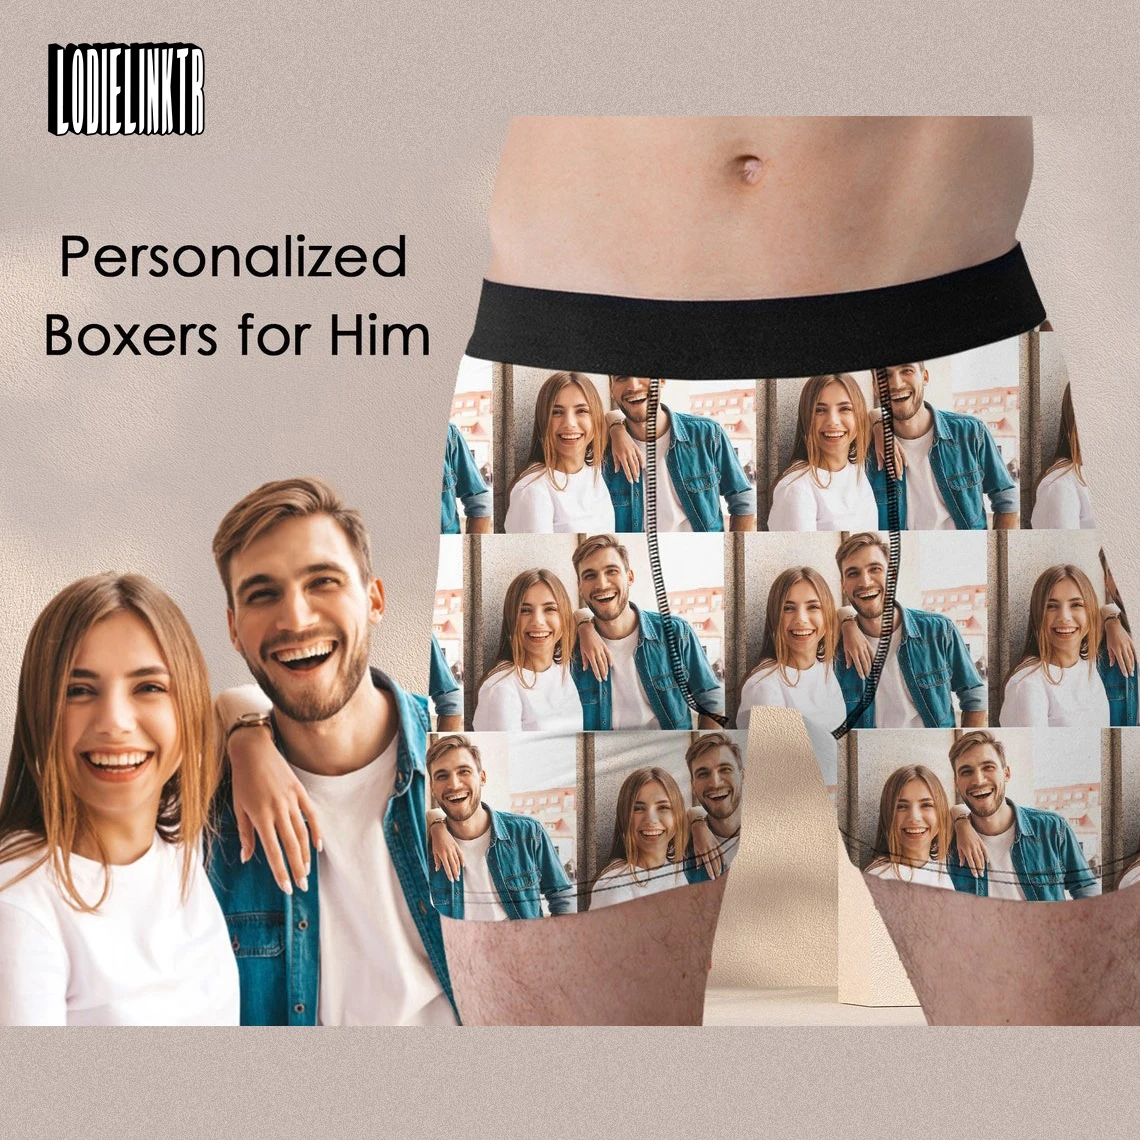 Custom Photo Collage Underwear Personalized Couple Family Picture On Boxers Birthday/Anniversary/Wedding/Valentine's Day Gifts 1pc photo albums scrapbook paper diy craft album scrapbooking picture album for wedding anniversary gifts memory books